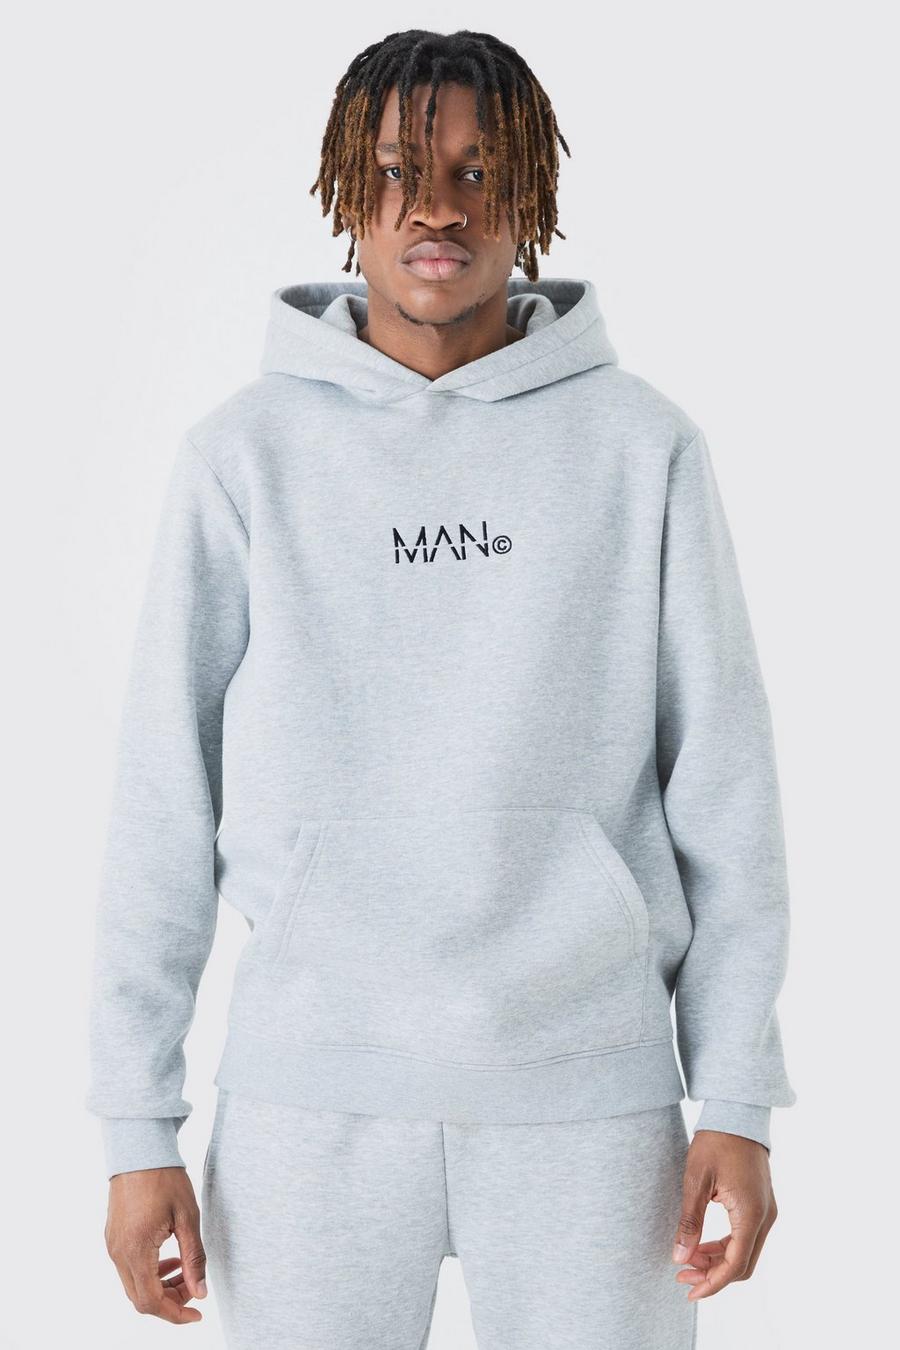 Tall Man Dash Over The Head Hoodie In Grey Marl